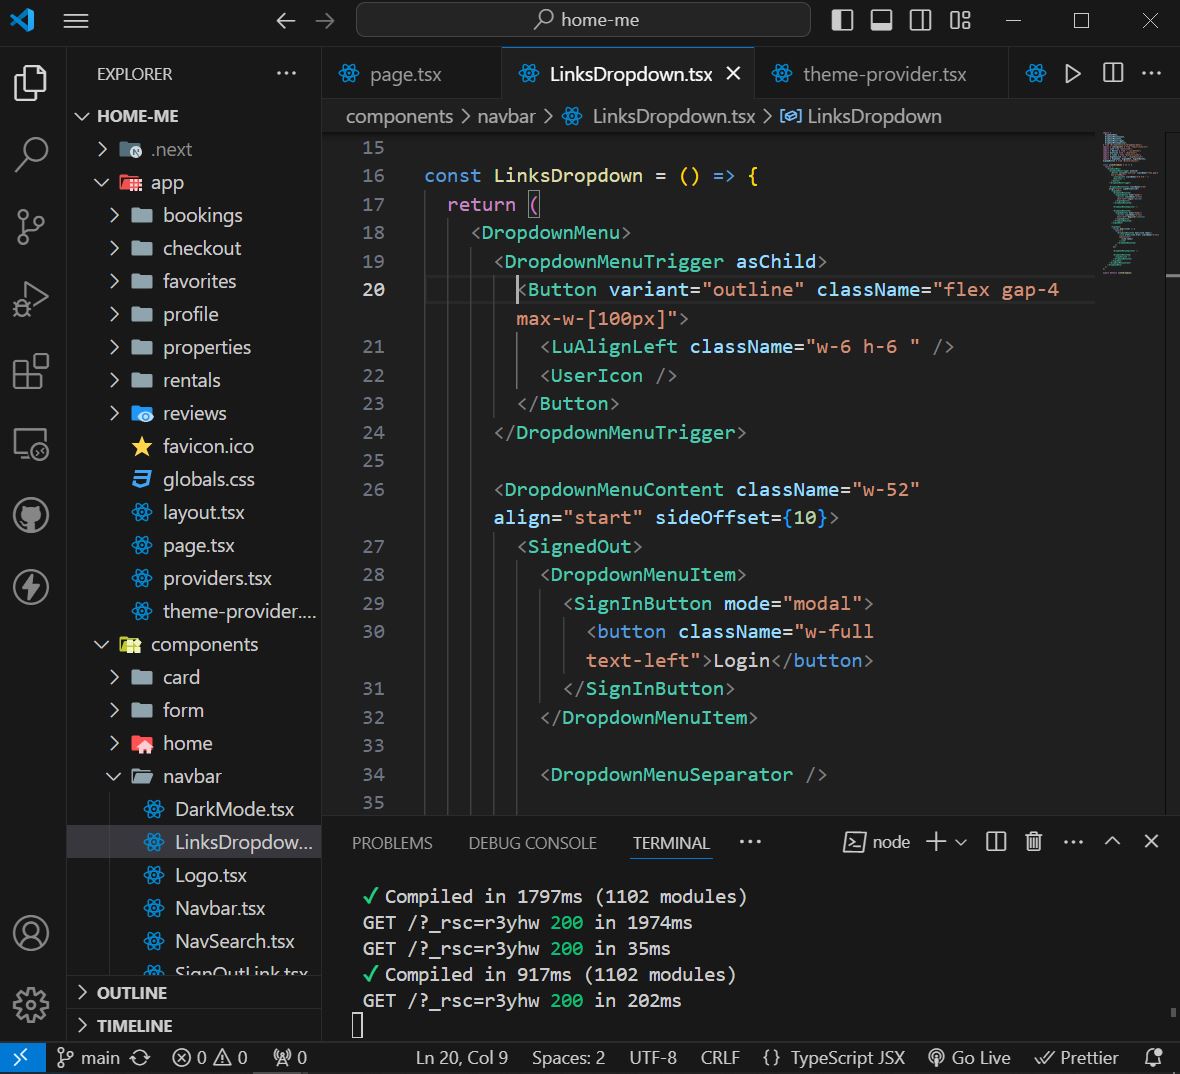 Day 1 #100daysOfCode #100daysofcodechallenge 
Project Based Learning Approach - 2 hours/day

What i covered on the project so far today.

<One /> Added a darkmode toggle feature using Shadcn/UI 'next-themes' library and created the dropdown menu component